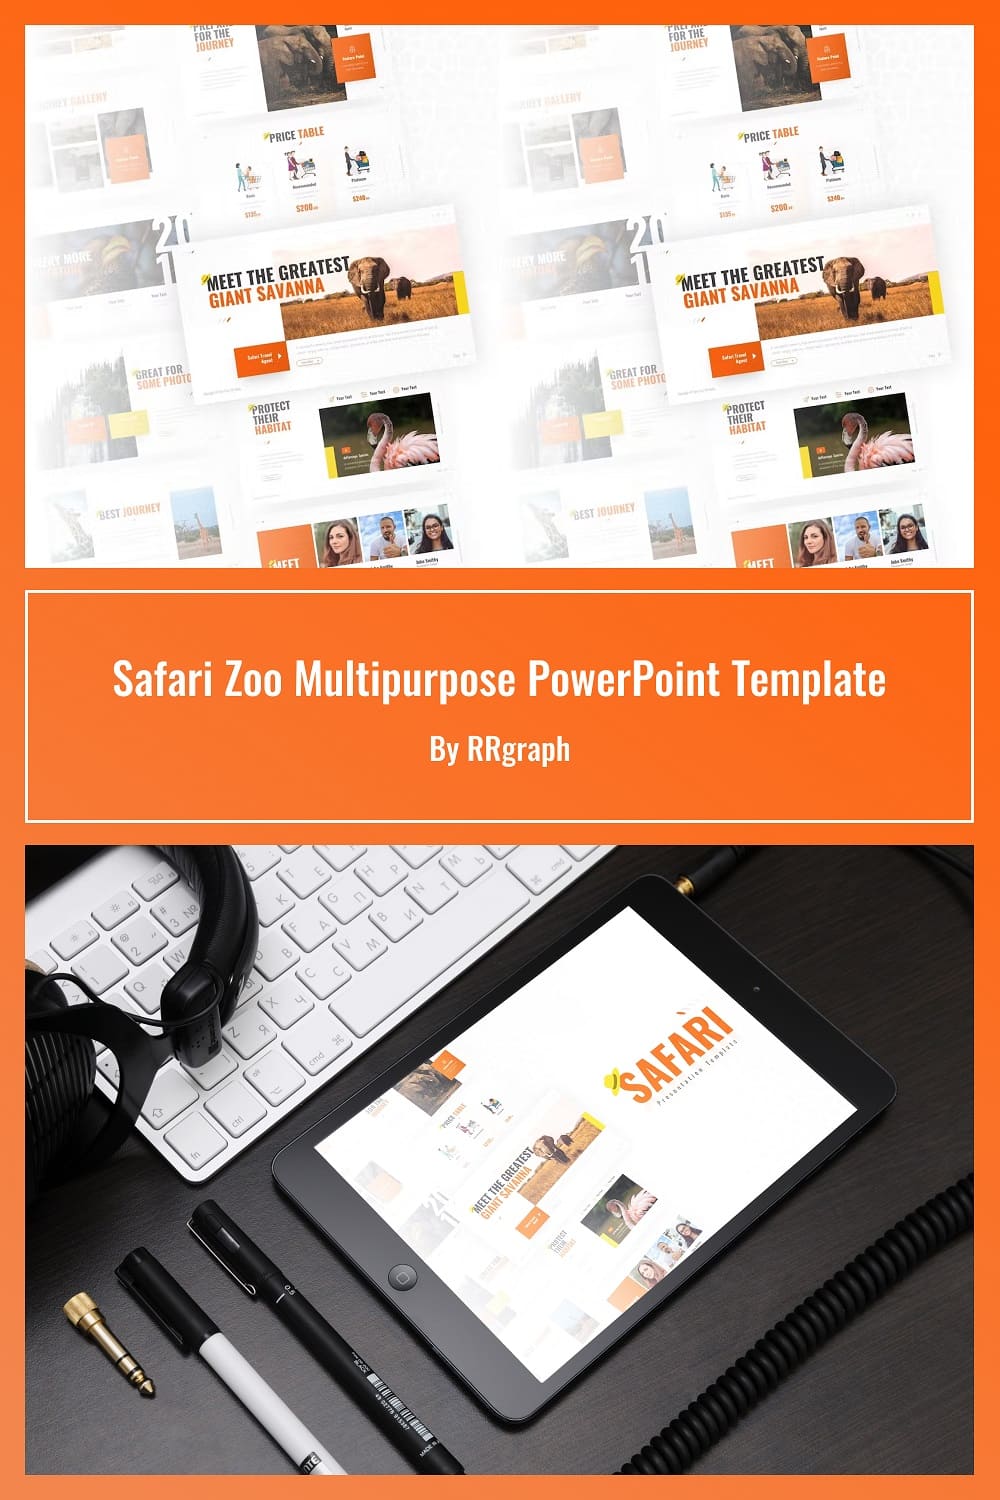 Preview Safari zoo multipurpose powerpoint template on the tablet.